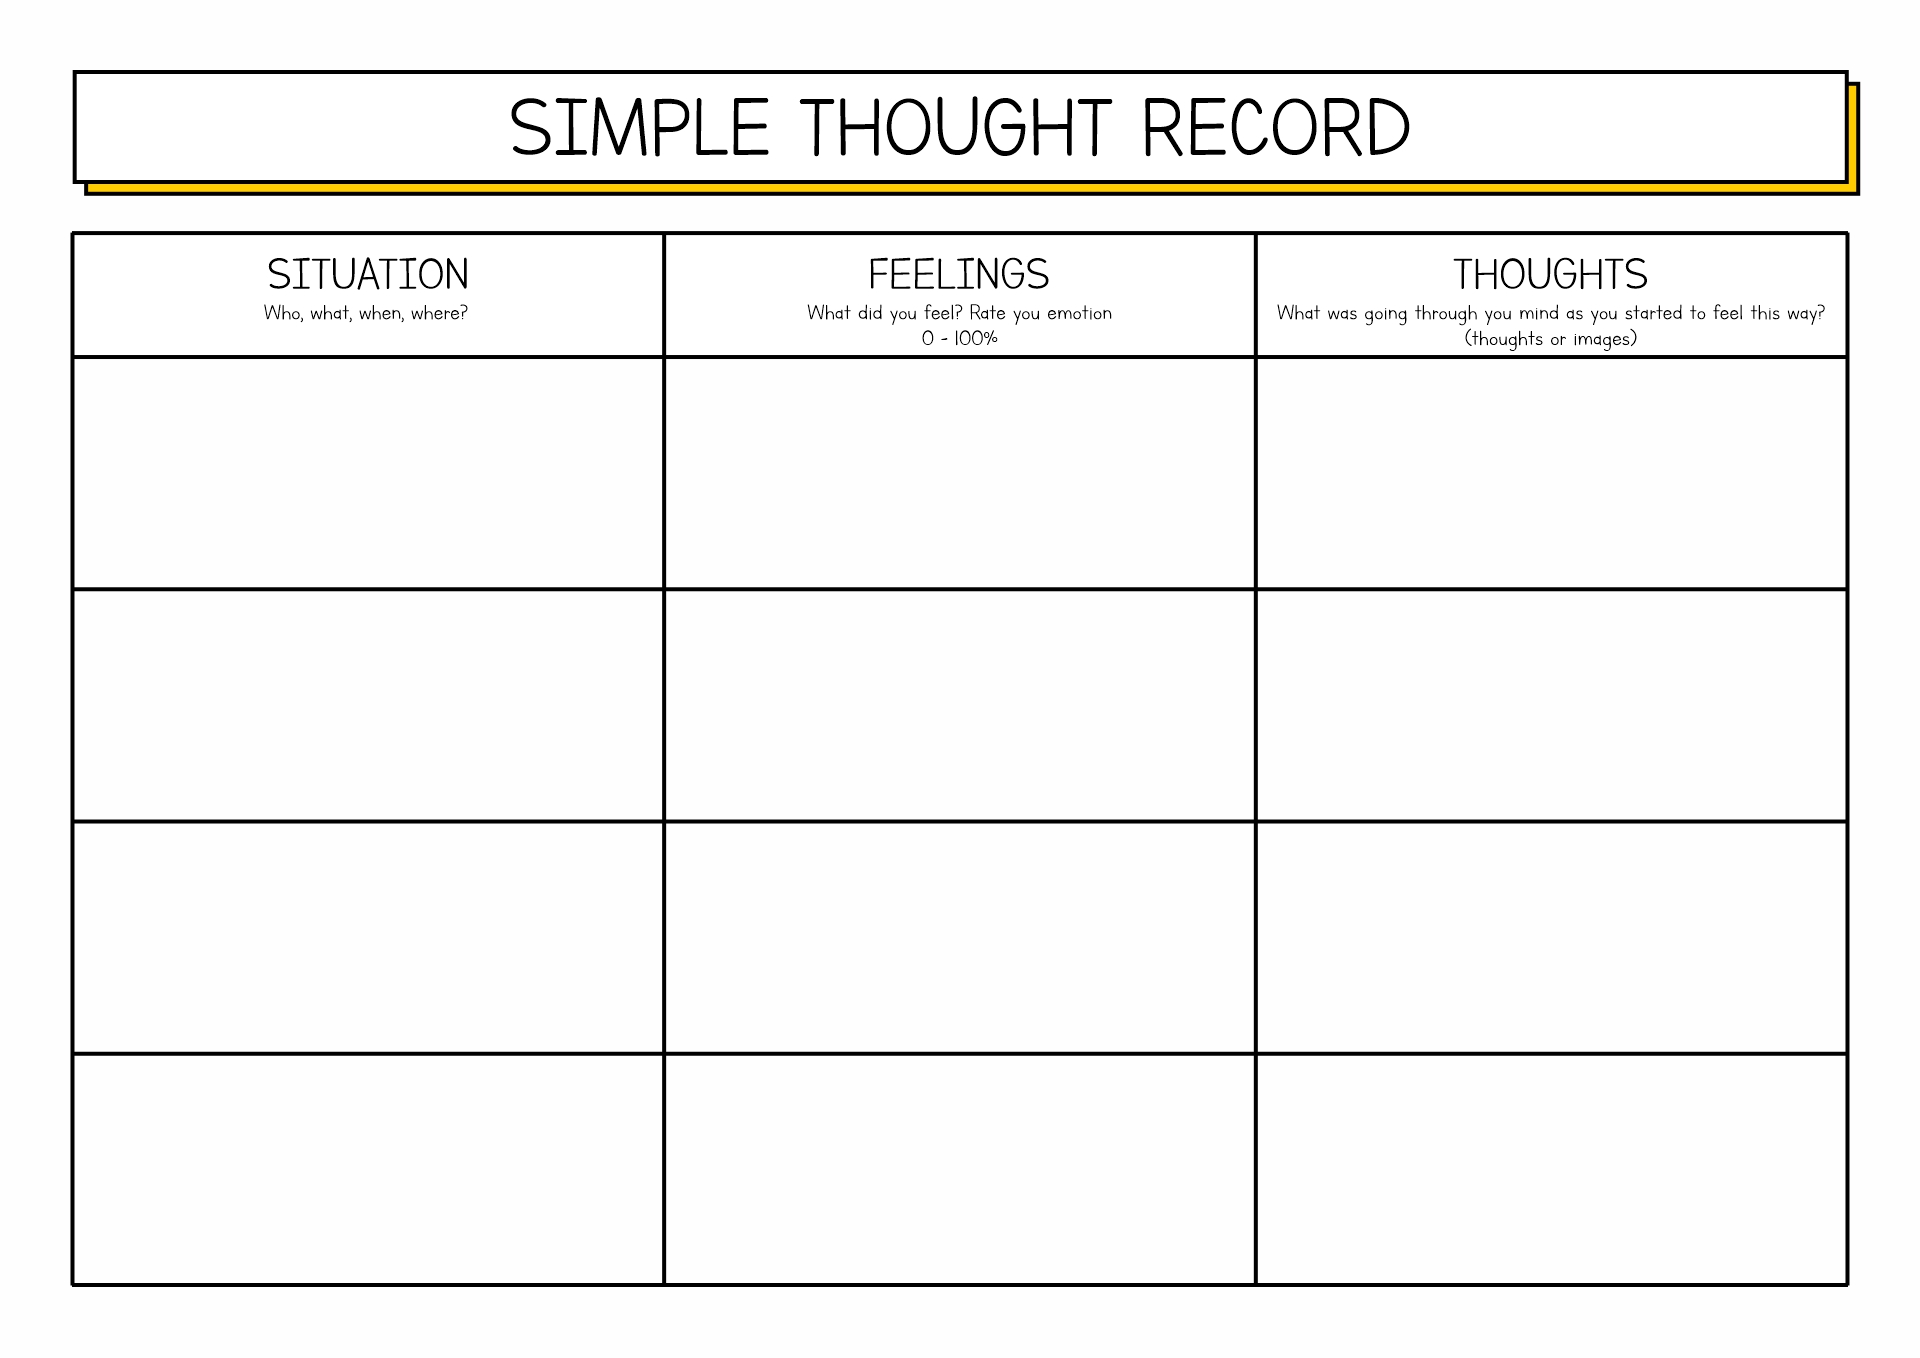 CBT Thought Record Worksheet